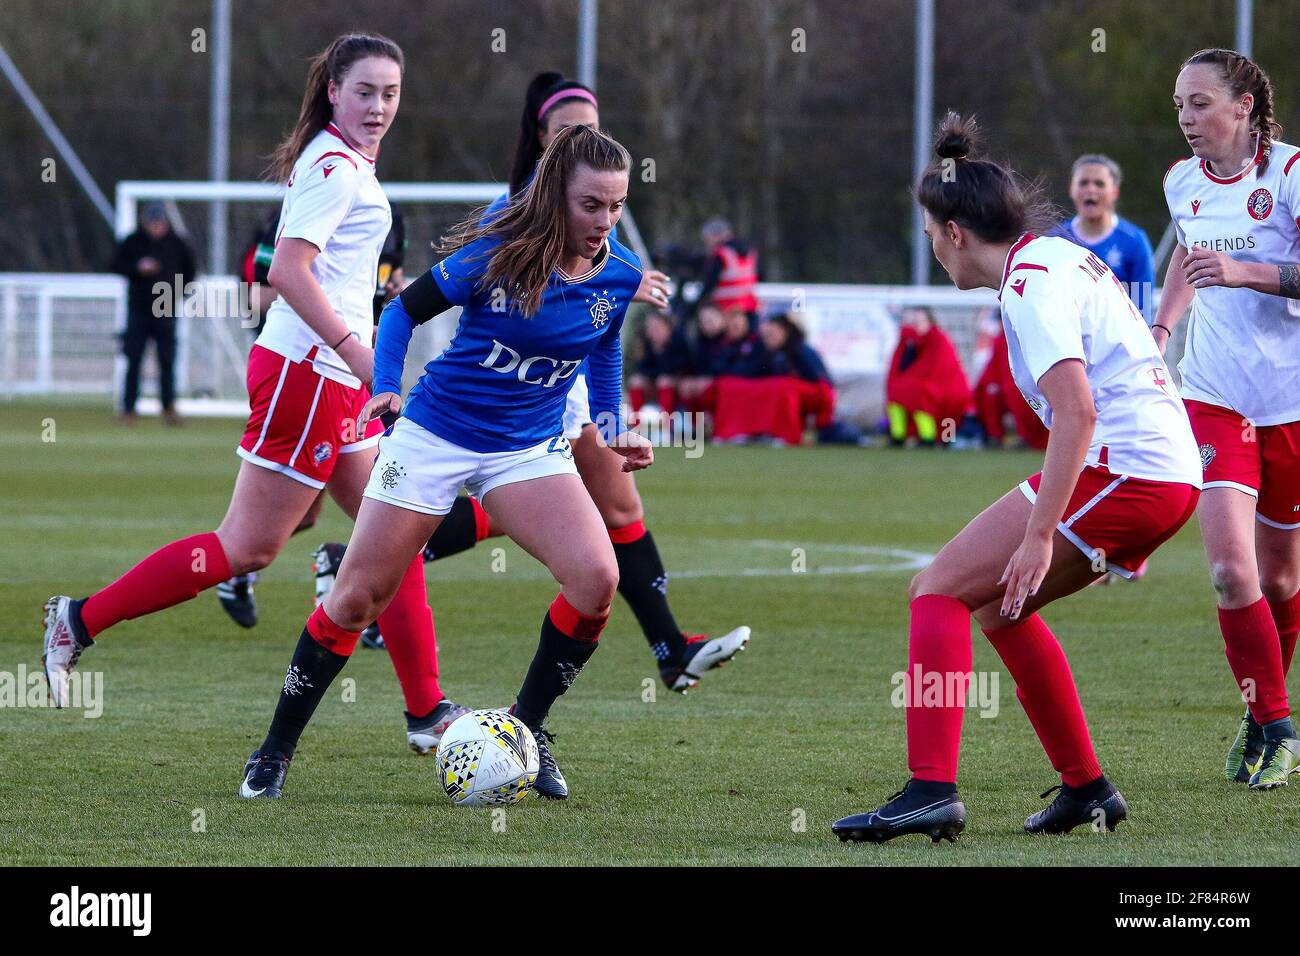 Glasgow, UK. 11th Apr, 2021. Kirsty Howart (#21) of Rangers Women FC during the Scottish Building Society SWPL1 Fixture Rangers FC vs Spartans FC at Rangers Training Centre, Glasgow, 11/04/2021 | Images courtesy of www.collargeimages.co.uk Credit: Colin Poultney/Alamy Live News Stock Photo